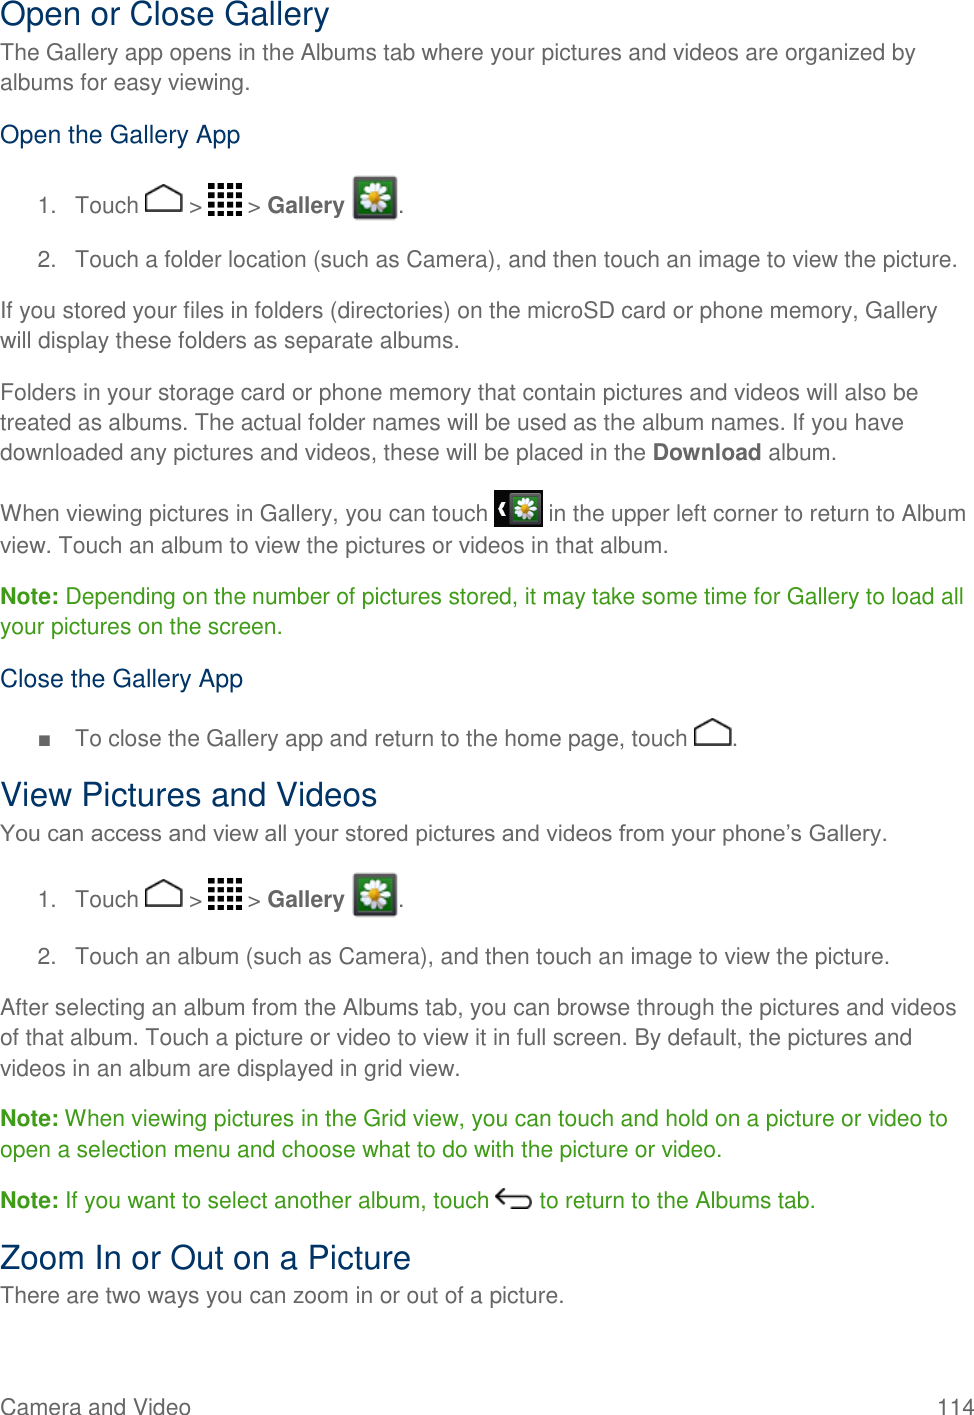 Camera and Video  114 Open or Close Gallery The Gallery app opens in the Albums tab where your pictures and videos are organized by albums for easy viewing. Open the Gallery App 1.  Touch   &gt;   &gt; Gallery  . 2.  Touch a folder location (such as Camera), and then touch an image to view the picture. If you stored your files in folders (directories) on the microSD card or phone memory, Gallery will display these folders as separate albums.  Folders in your storage card or phone memory that contain pictures and videos will also be treated as albums. The actual folder names will be used as the album names. If you have downloaded any pictures and videos, these will be placed in the Download album. When viewing pictures in Gallery, you can touch   in the upper left corner to return to Album view. Touch an album to view the pictures or videos in that album. Note: Depending on the number of pictures stored, it may take some time for Gallery to load all your pictures on the screen. Close the Gallery App ■  To close the Gallery app and return to the home page, touch  . View Pictures and Videos You can access and view all your stored pictures and videos from your phone’s Gallery. 1.  Touch   &gt;   &gt; Gallery  . 2.  Touch an album (such as Camera), and then touch an image to view the picture. After selecting an album from the Albums tab, you can browse through the pictures and videos of that album. Touch a picture or video to view it in full screen. By default, the pictures and videos in an album are displayed in grid view. Note: When viewing pictures in the Grid view, you can touch and hold on a picture or video to open a selection menu and choose what to do with the picture or video. Note: If you want to select another album, touch   to return to the Albums tab. Zoom In or Out on a Picture There are two ways you can zoom in or out of a picture. 